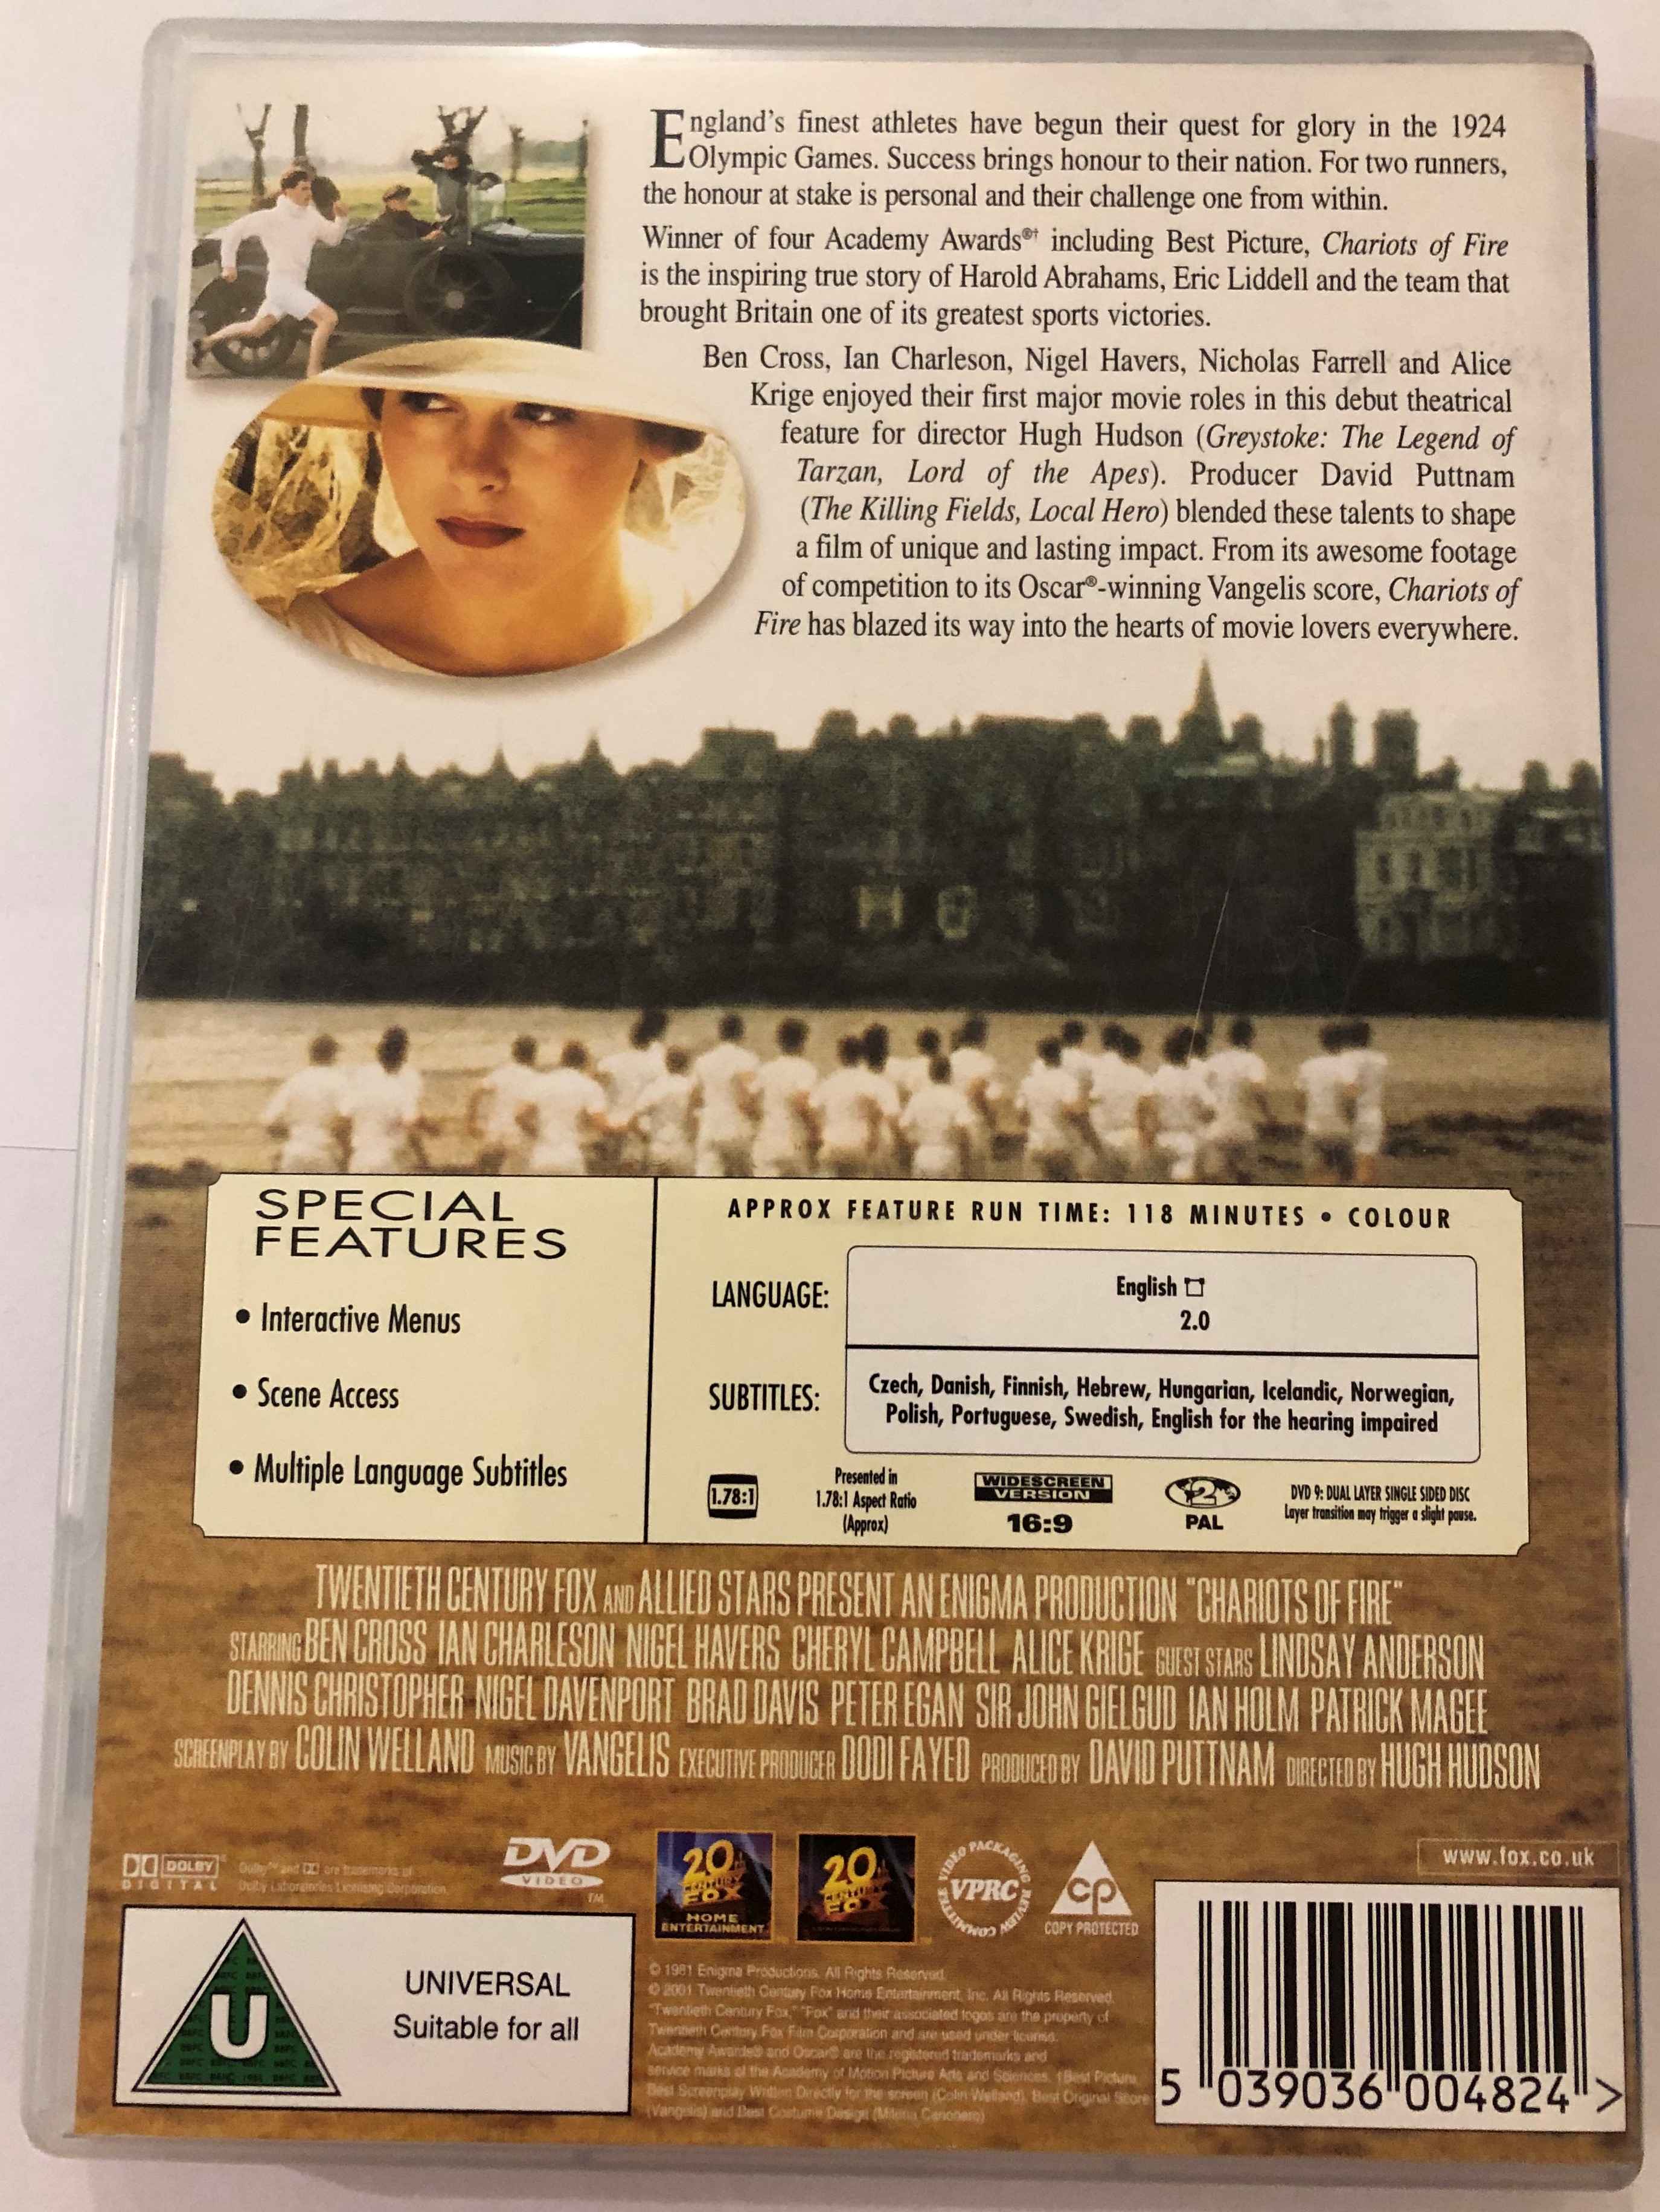 chariots-of-fire-dvd-1981-directed-by-hugh-hudson-2.jpg